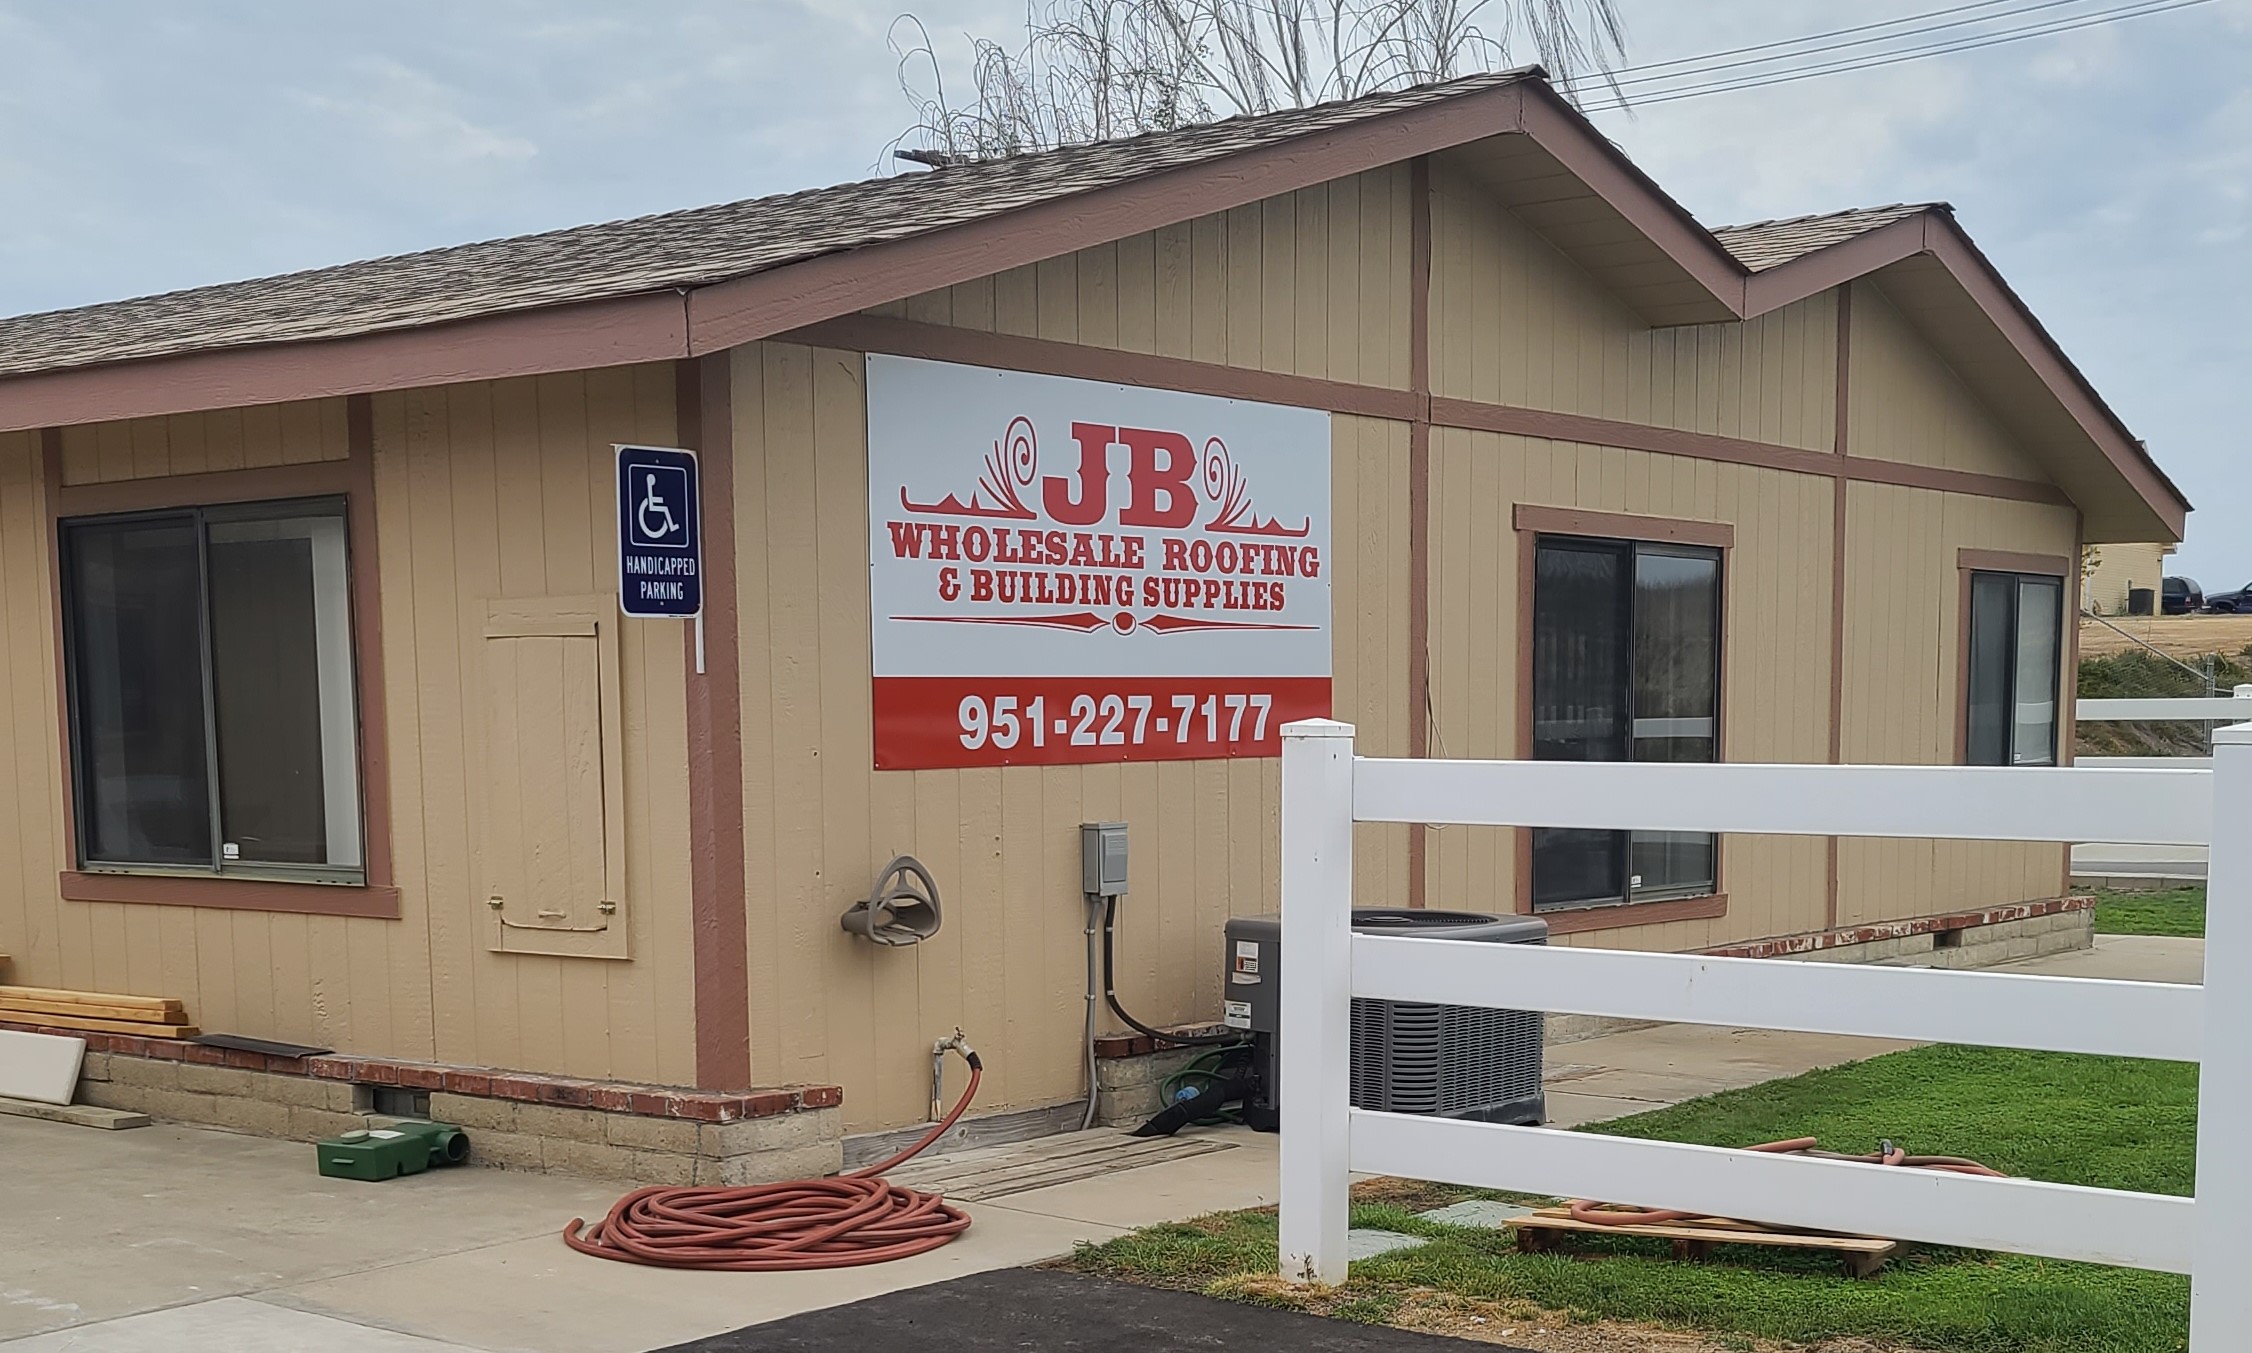 More from our sign package for JB Wholesale Roofing's Murrieta location, a metal panel building sign that displays their brand logo and its contact details.